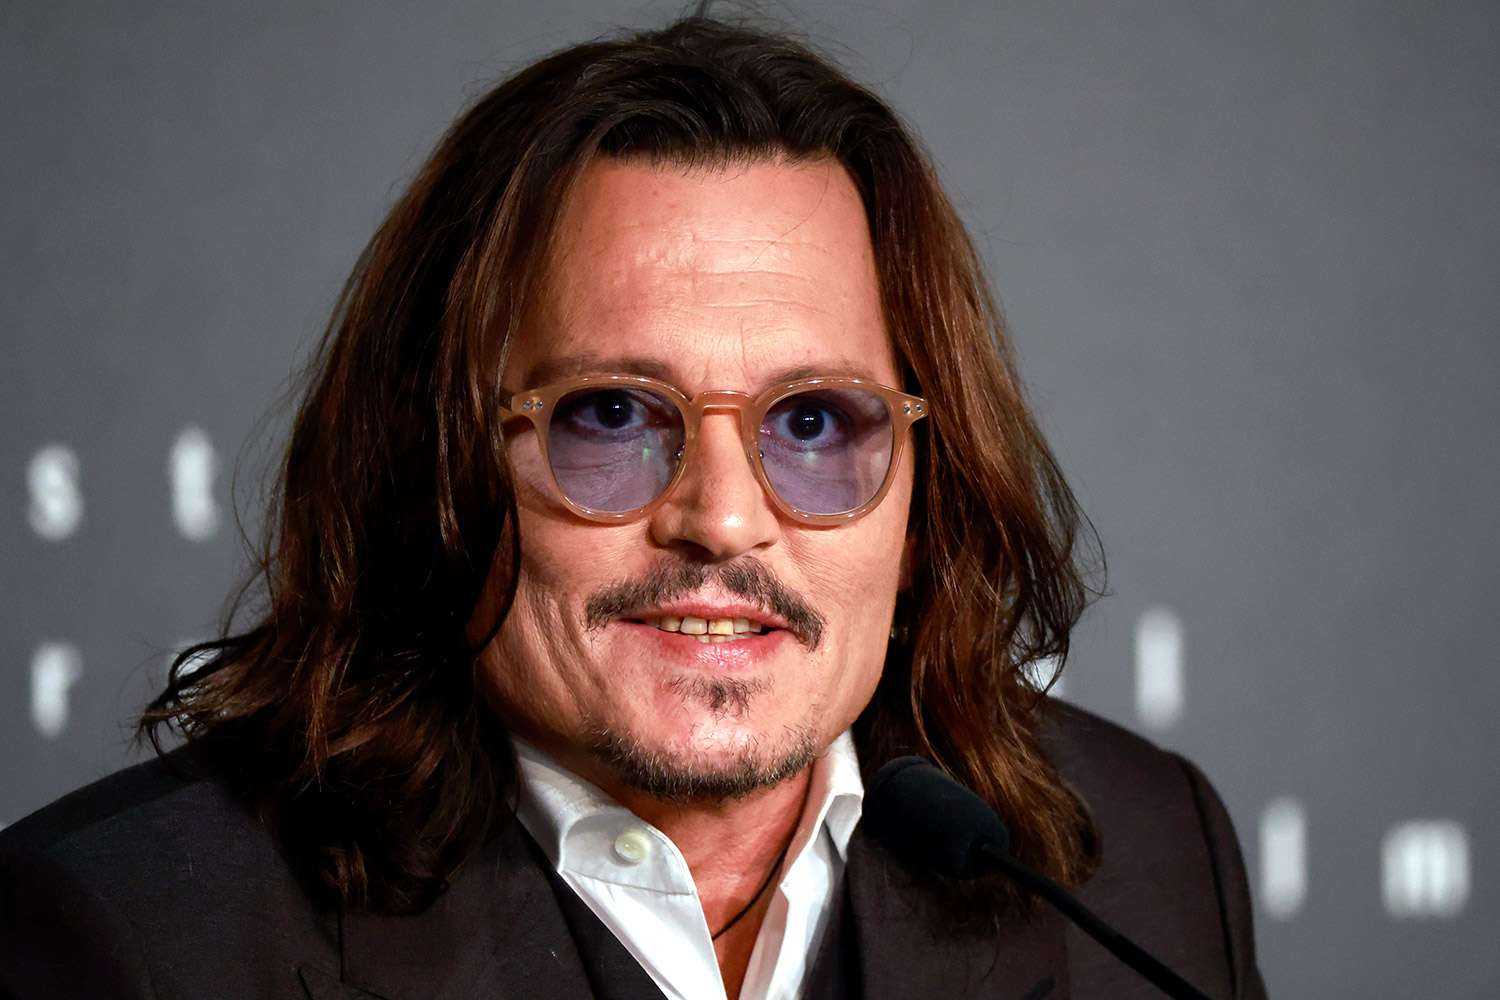 'Camille's performance during the Johnny Depp trial proved to the world